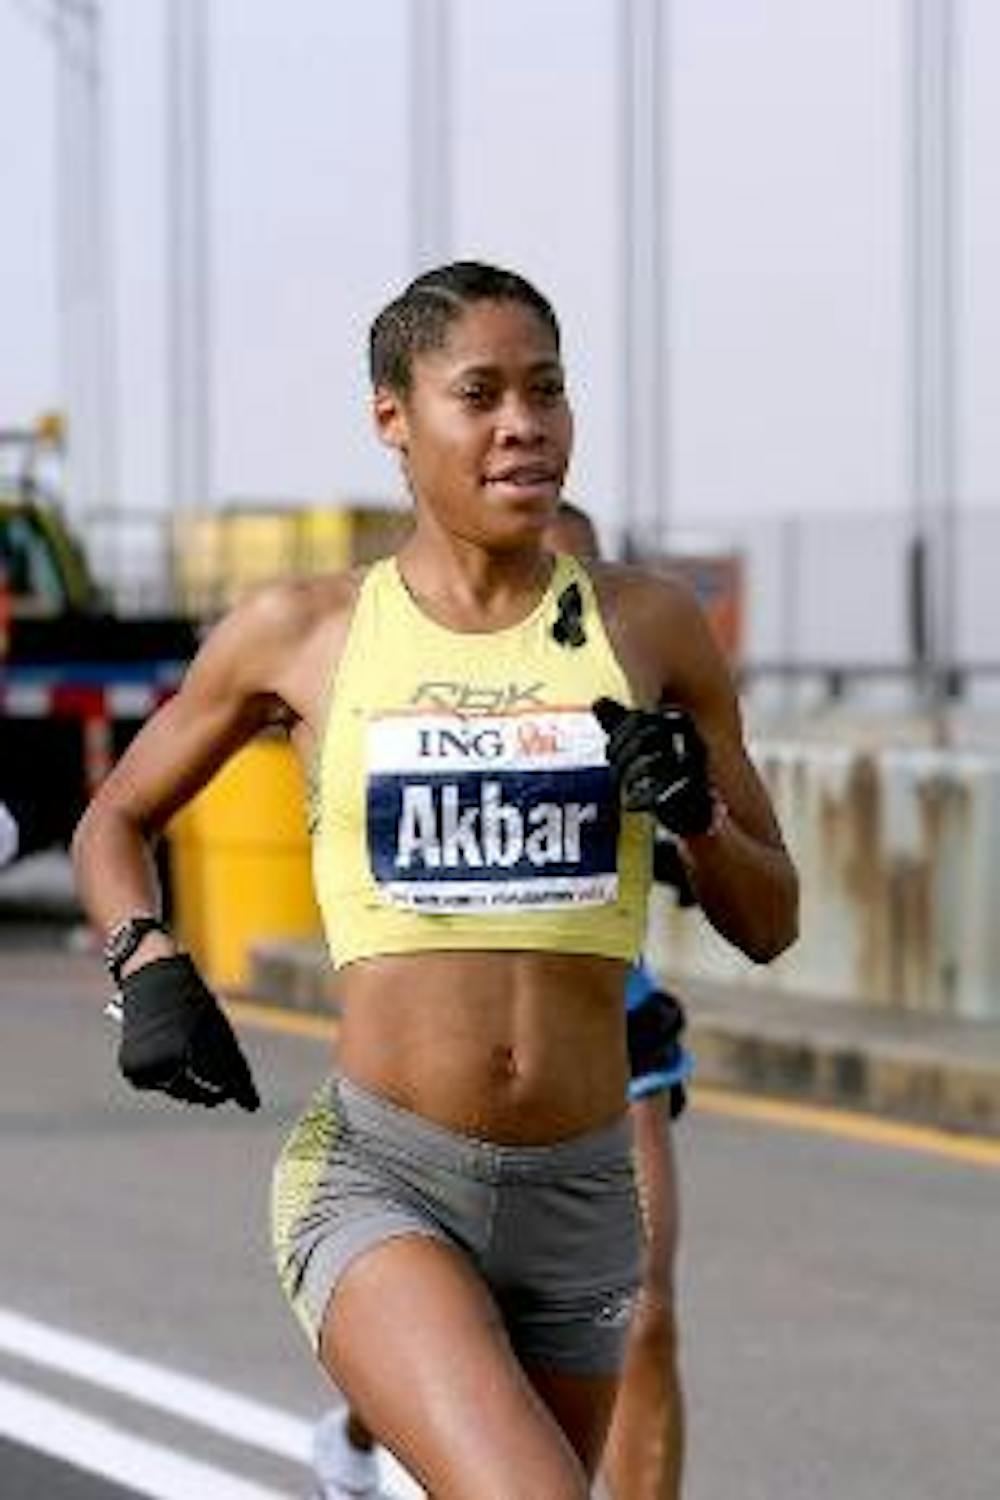 MARATHON MADNESS - Samia Akbar, a 2003 graduate from the College of Arts and Sciences, is now a professional runner. Akbar is competing in the Olympic Trials in hopes of making the U.S. marathon team.